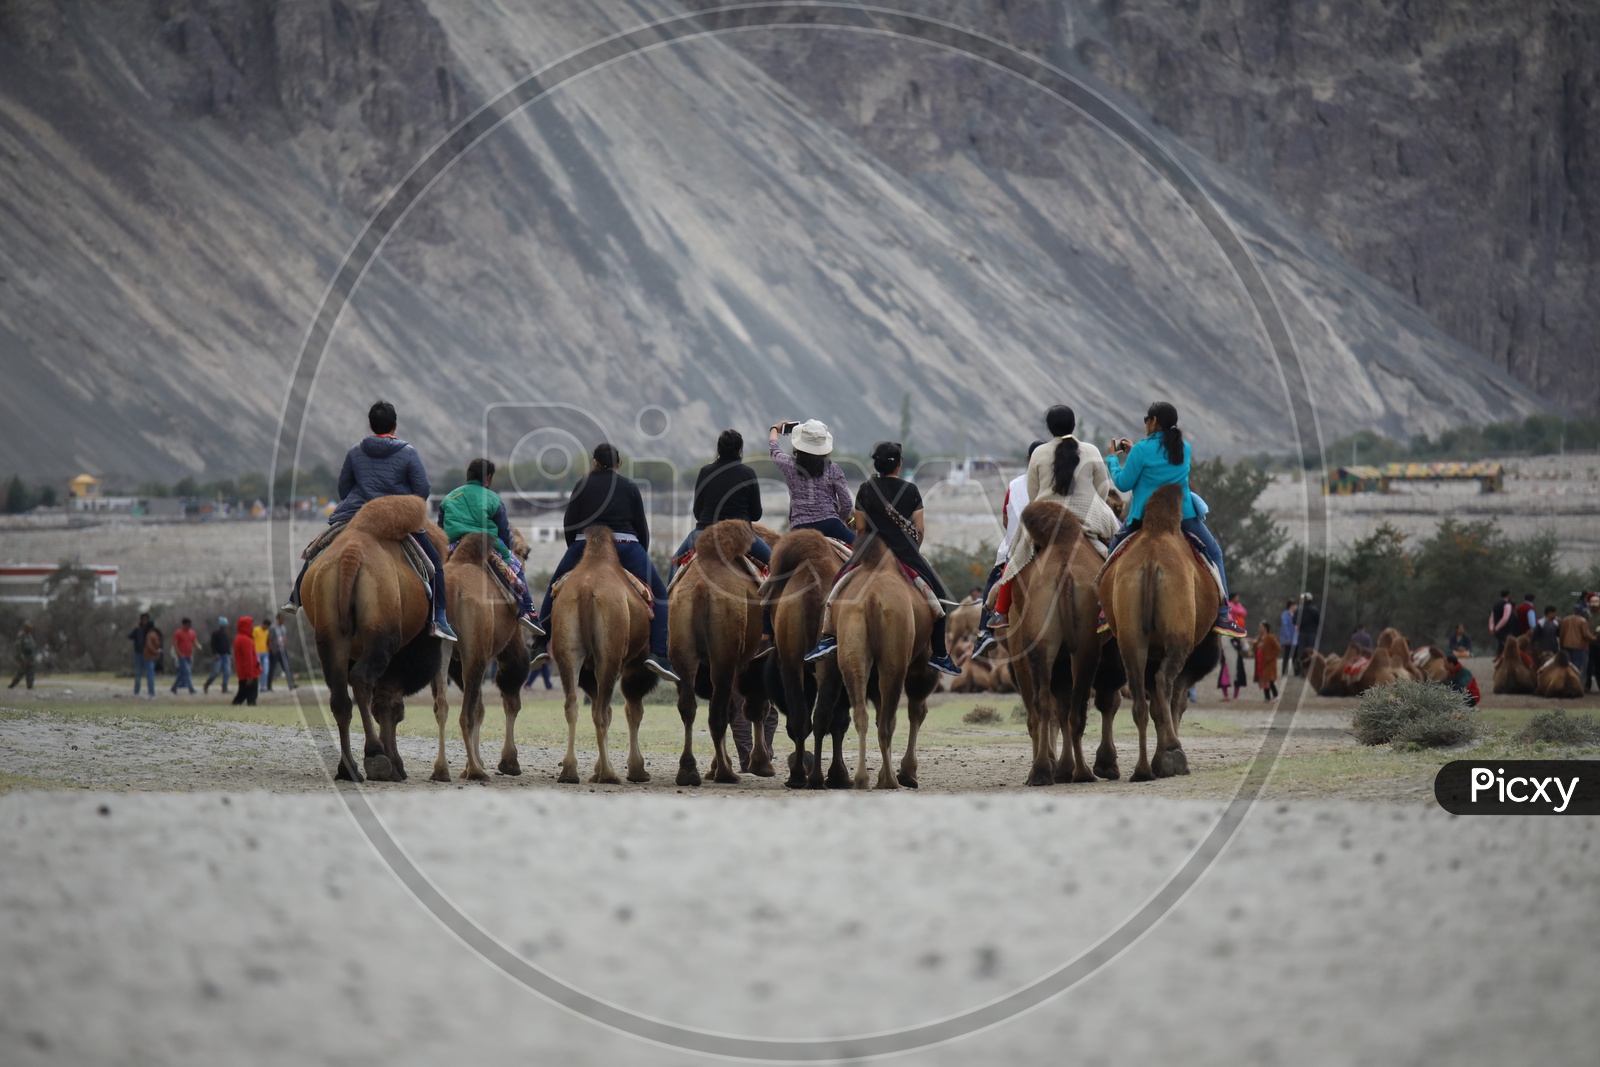 Tourists Using Backtrian Camels / Two - Hooded Camels For Commuting In Leh / Ladakh   / Nubra Valley Camel Rides